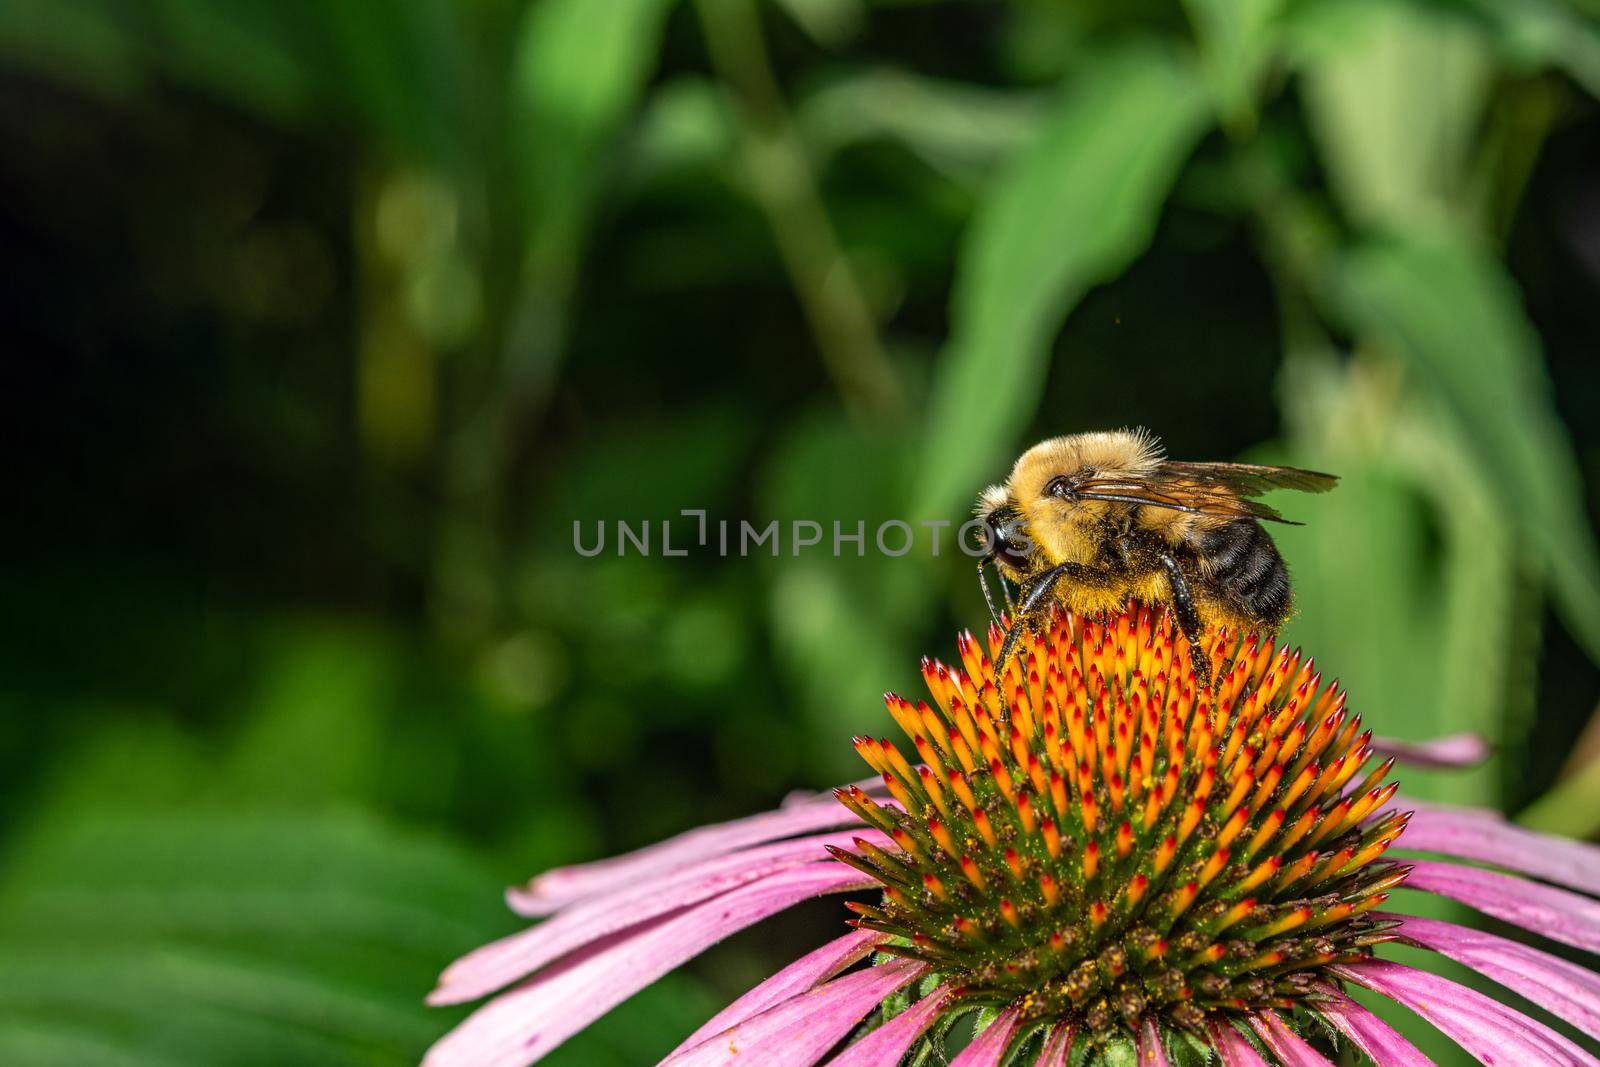 Bumblebee saddled the head of a pink flower in search of nectar by ben44